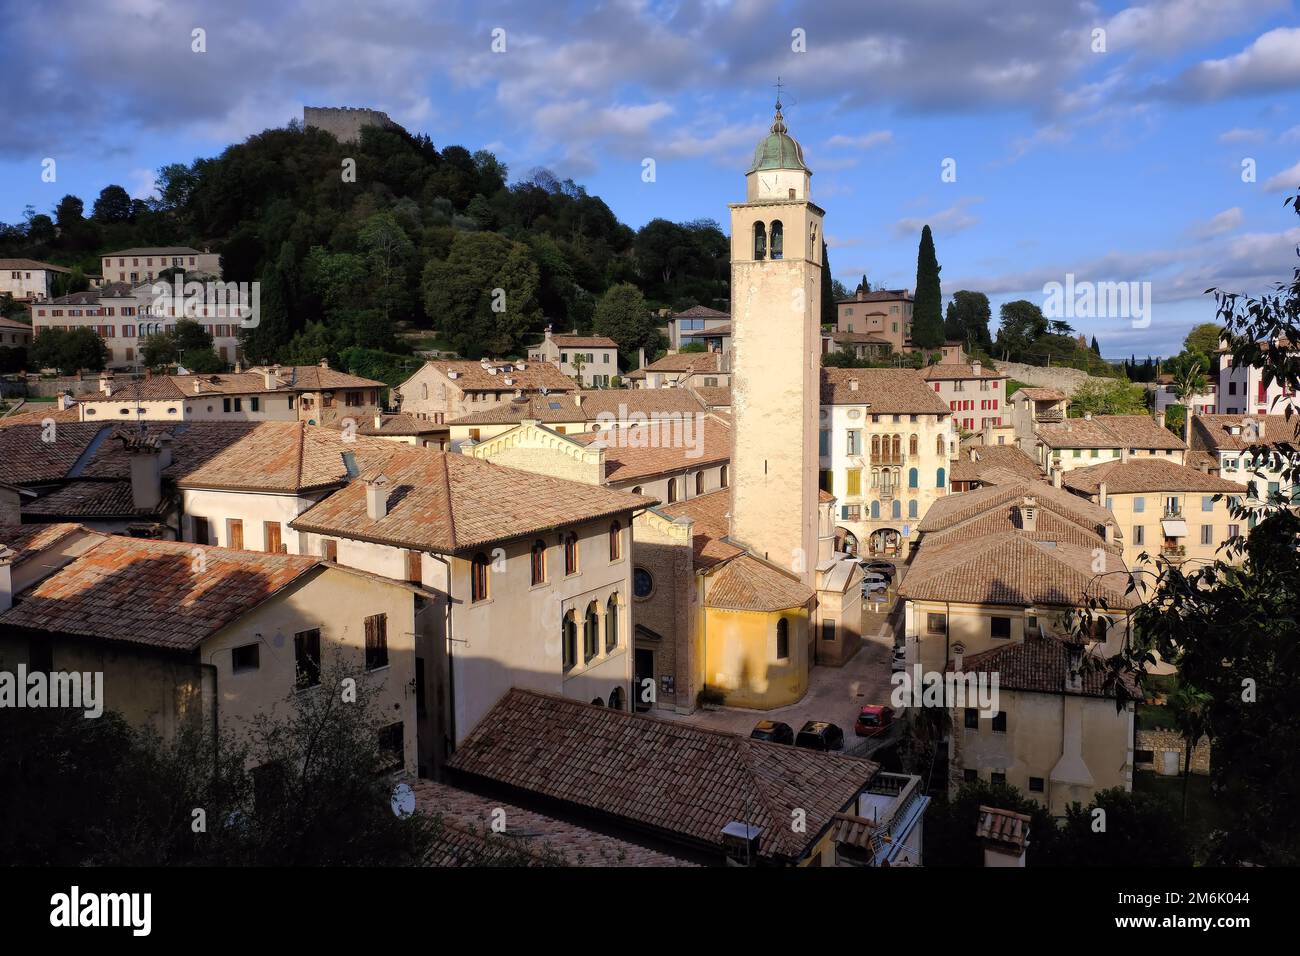 Asolo: Bell tower of cathedral (duomo), castle and town of Asolo, Treviso, Veneto, Italy Stock Photo